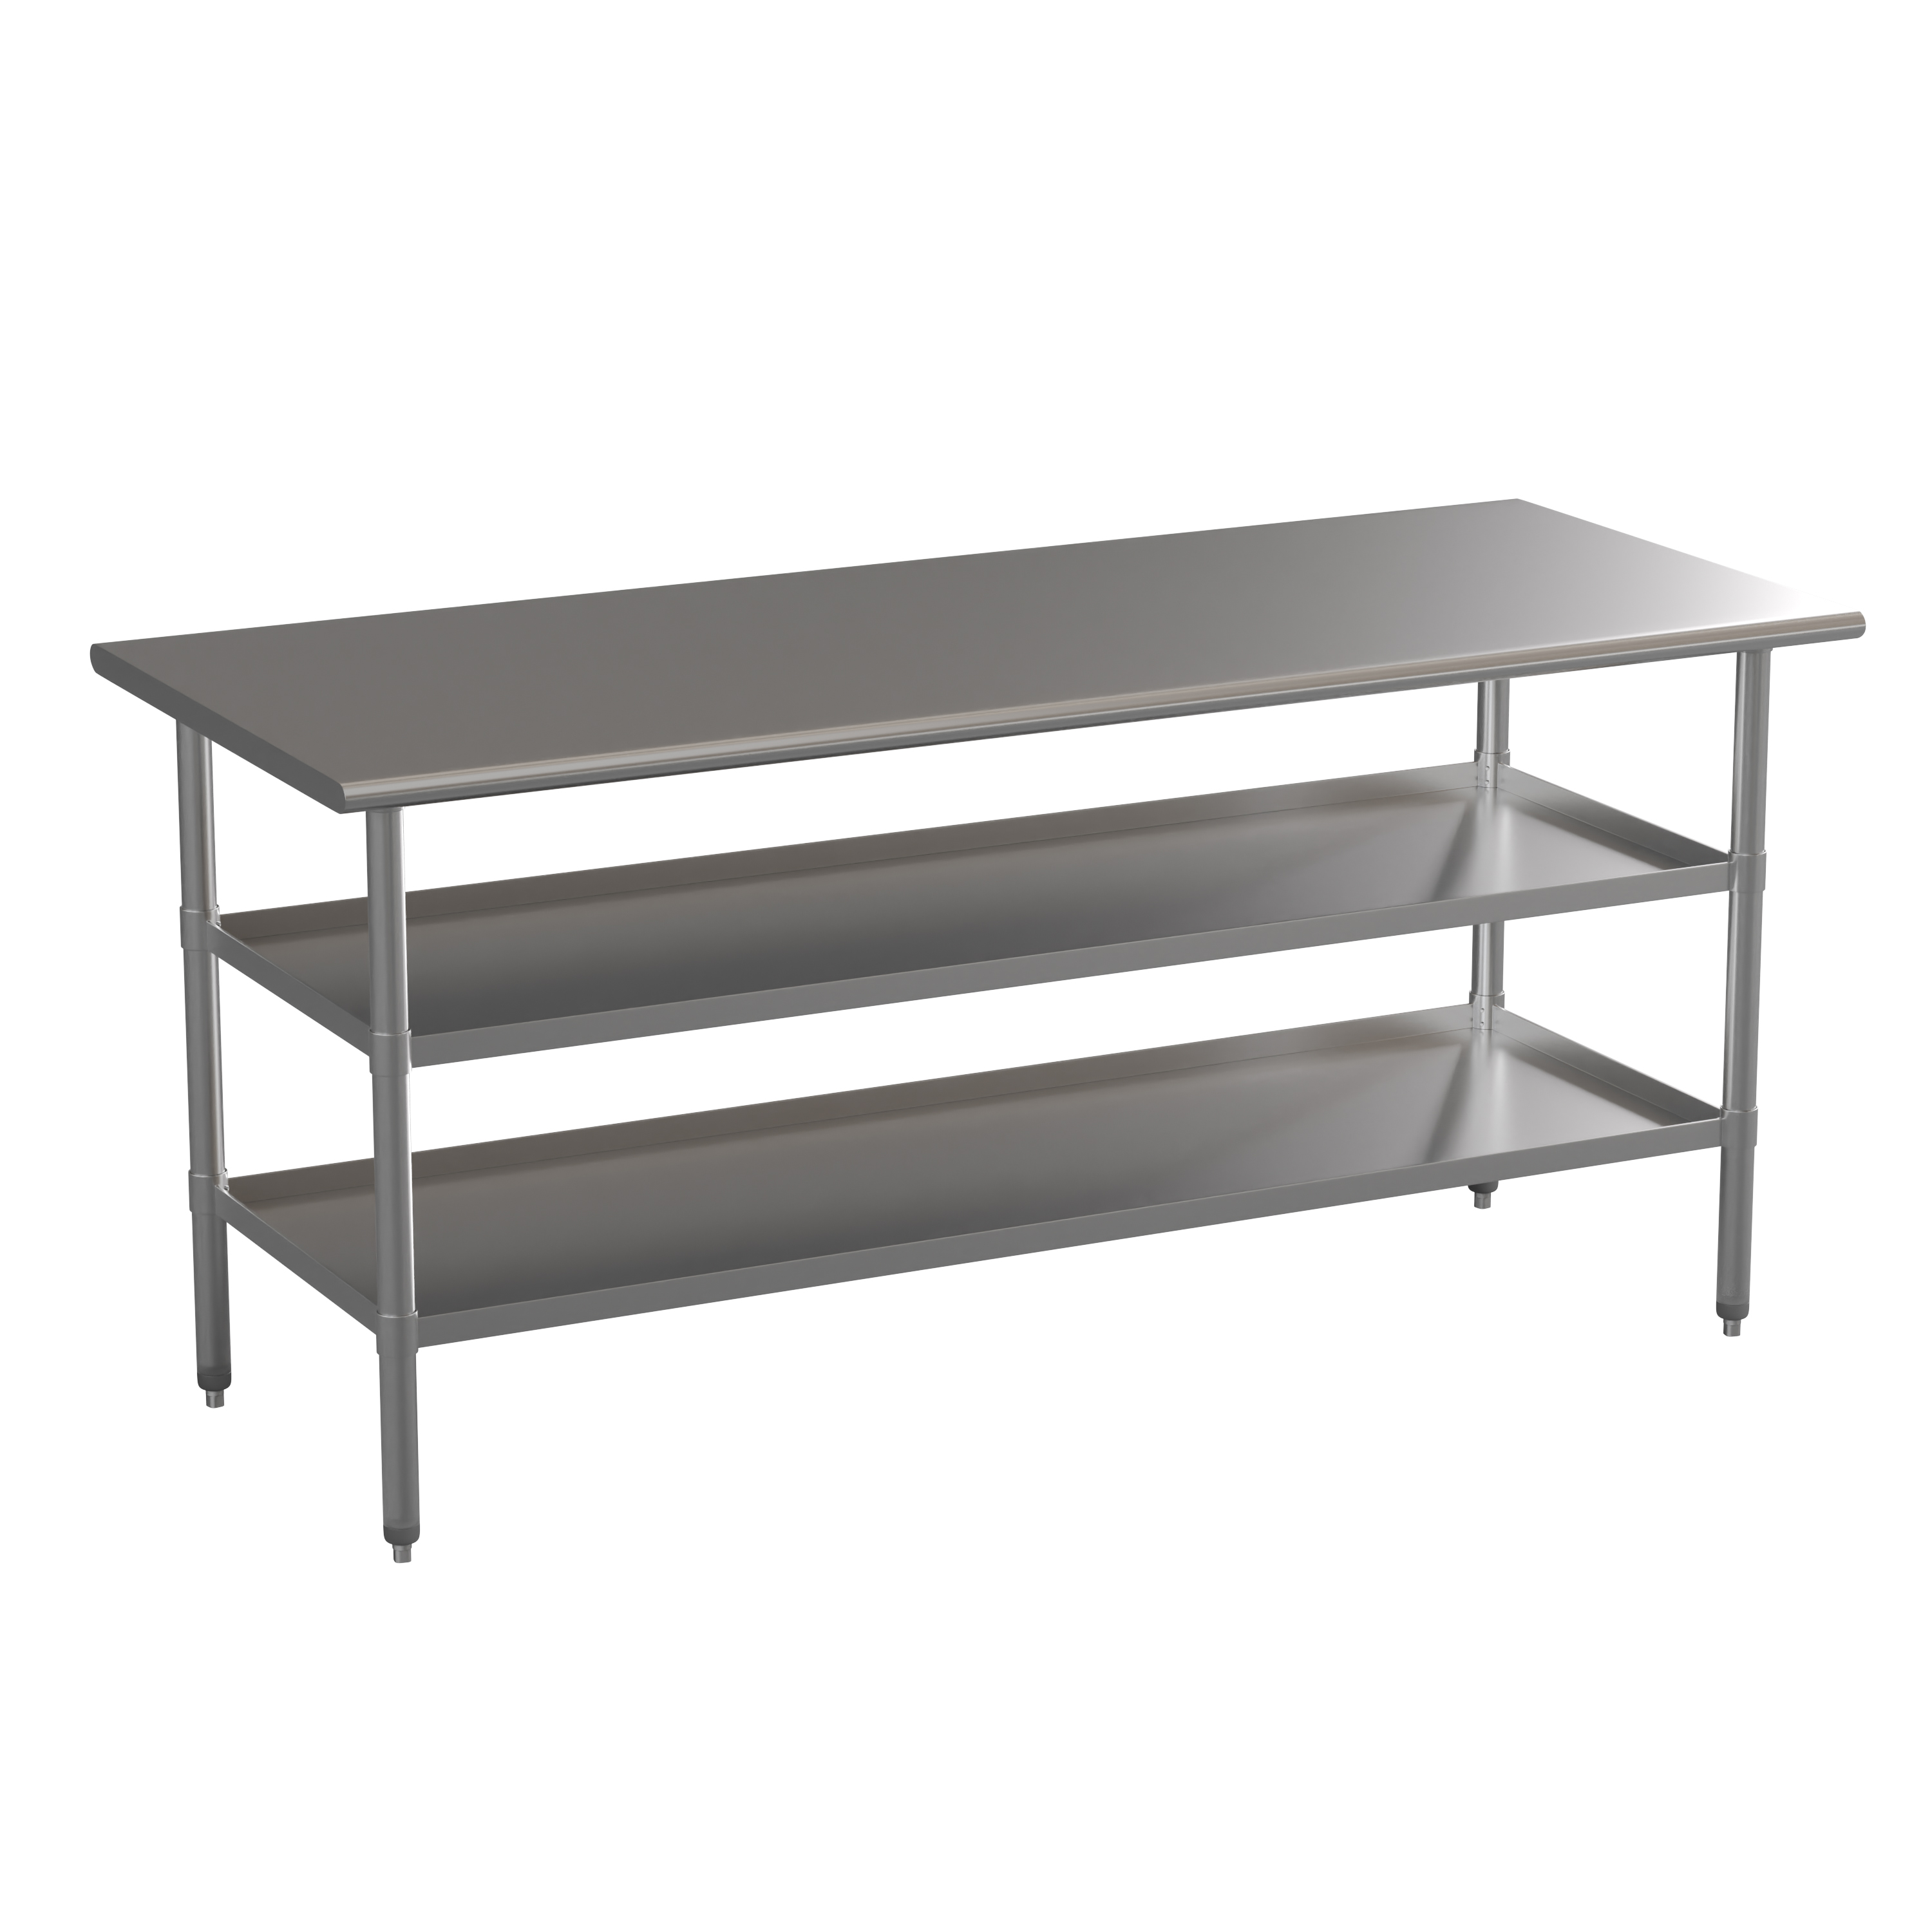 Flash Furniture NH-WT-GU-3072-GG Stainless Steel 18 Gauge Work Table with 2 Undershelves, 72"W x 30"D x 34.5"H, NSF